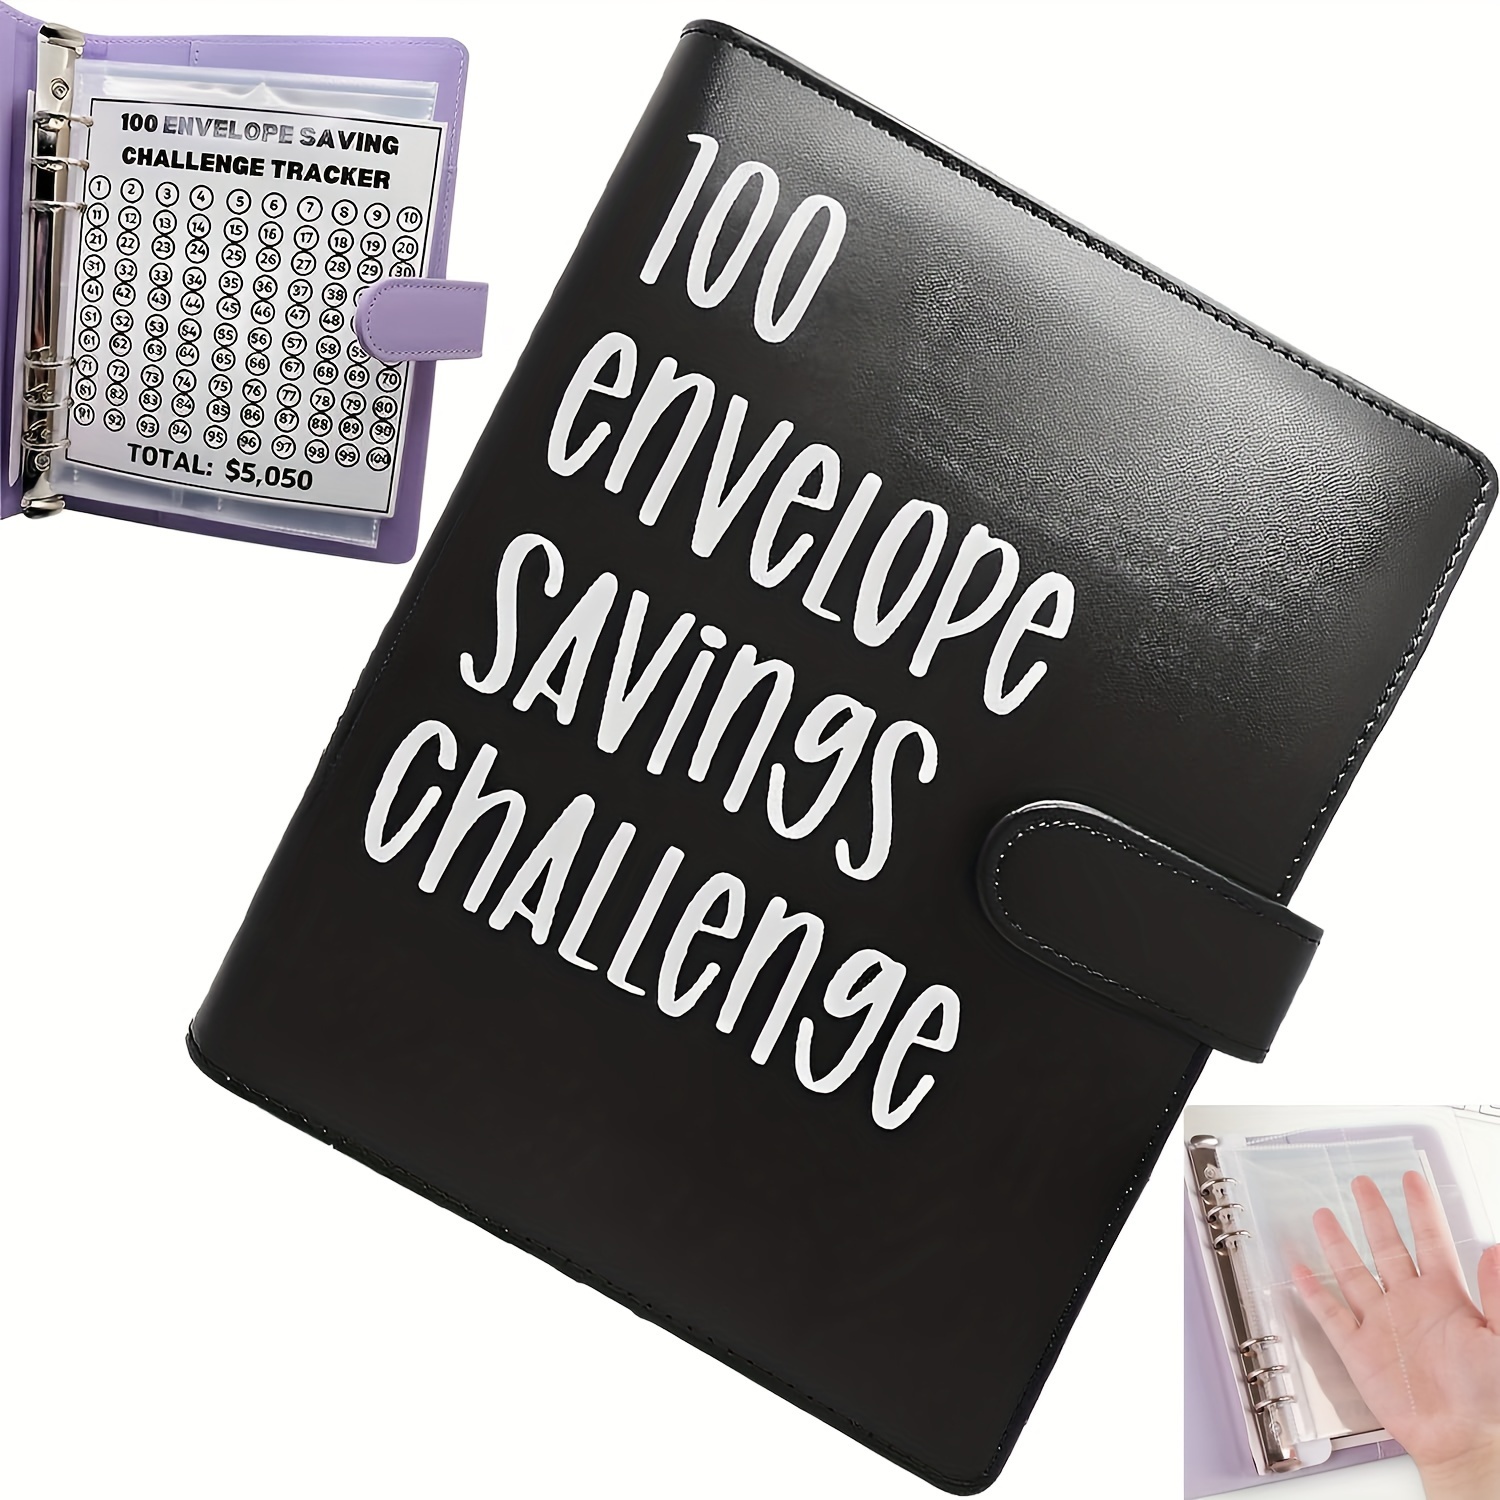 100 Envelopes Money Saving Challenge: Low Income Savings Challenge Tracker  Journal | Easy And Fun Way To Save $5,050 |120 Pages 100 envelopes Money